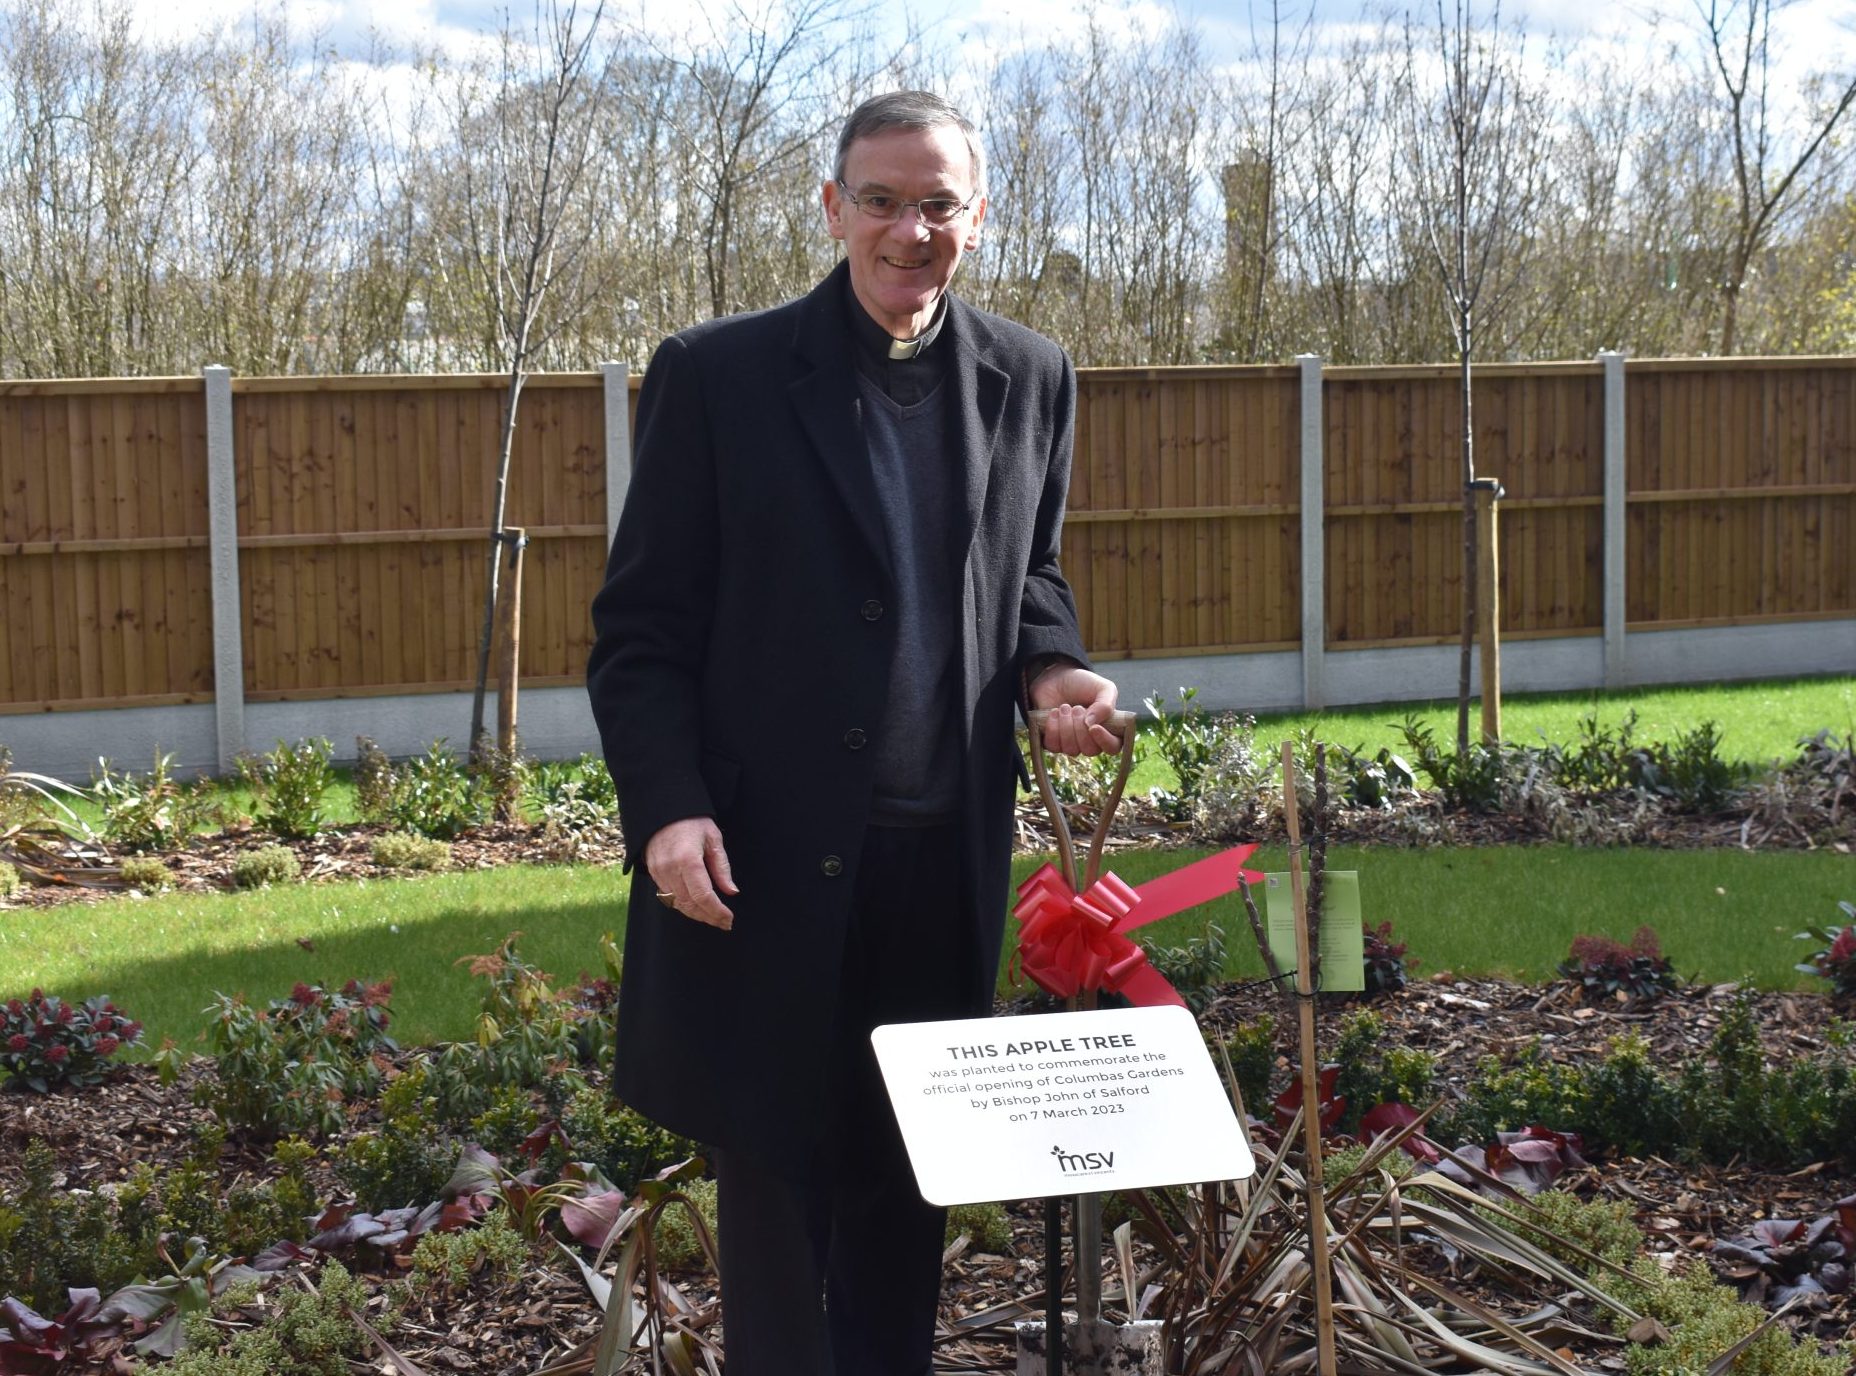 Bishop John launches Columbas Gardens by planting an apple tree